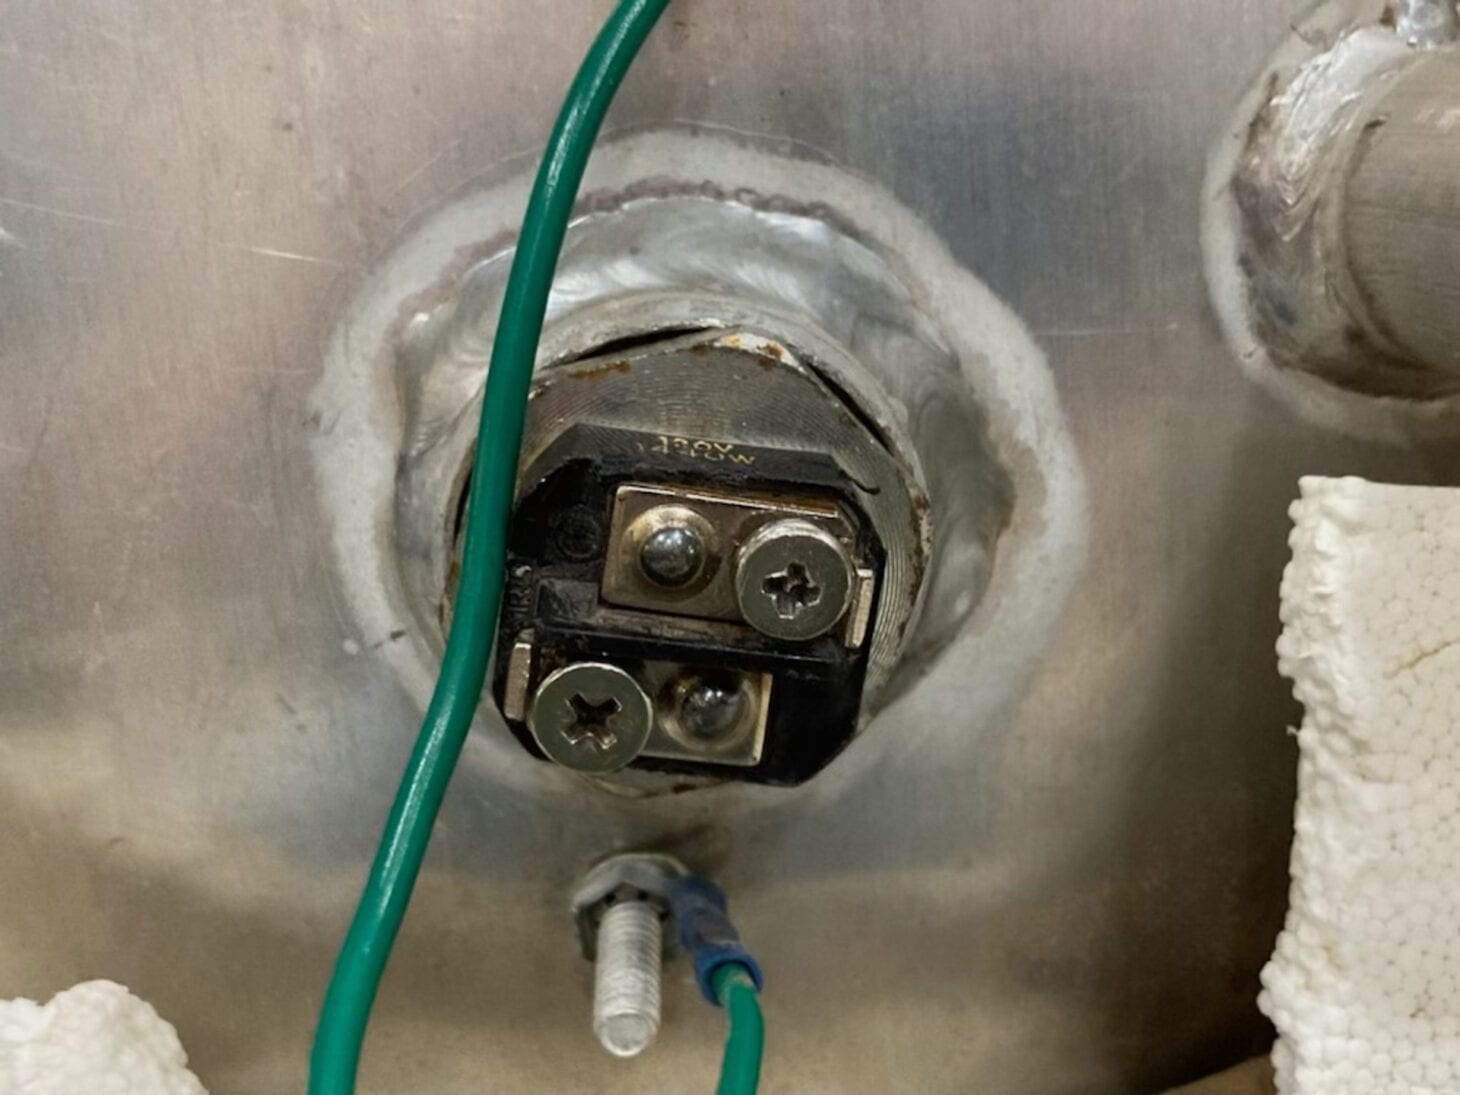 The heating element in an RV water heater.